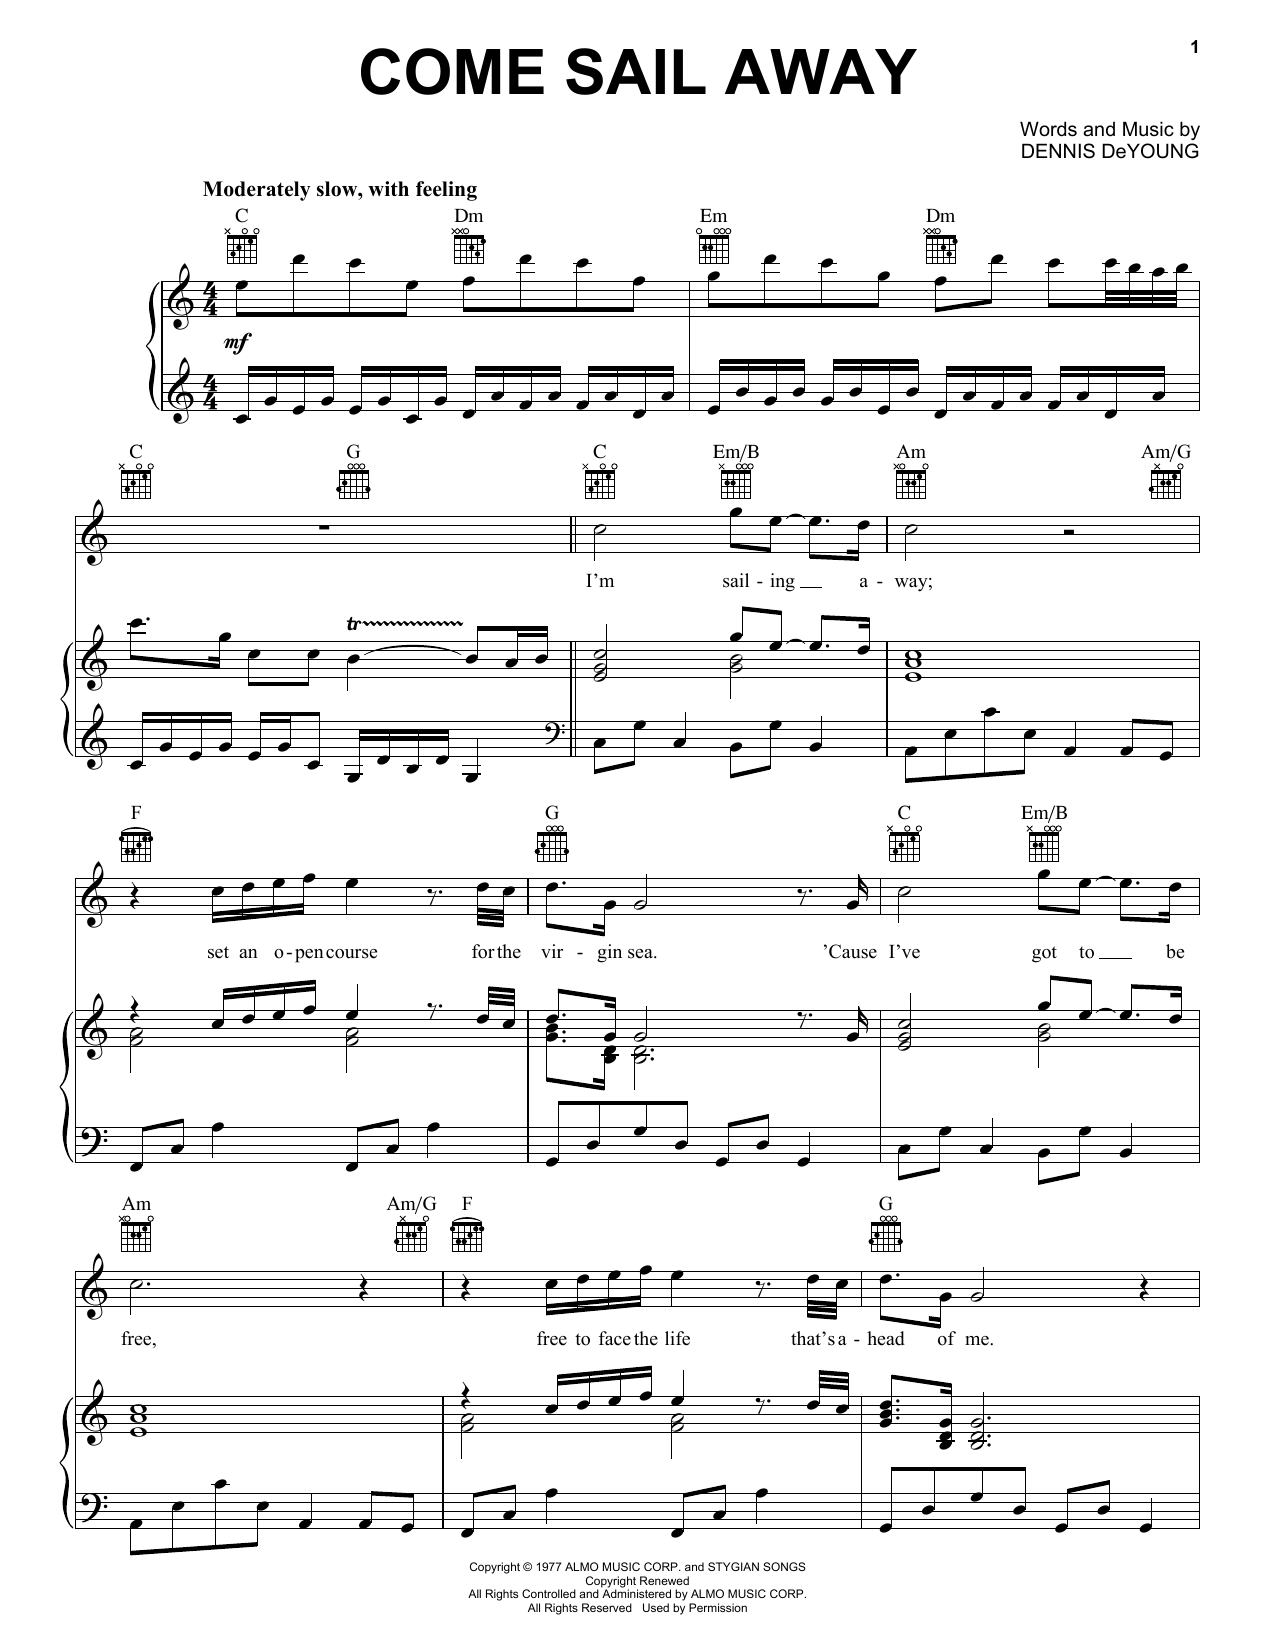 Styx Come Sail Away sheet music notes and chords. Download Printable PDF.